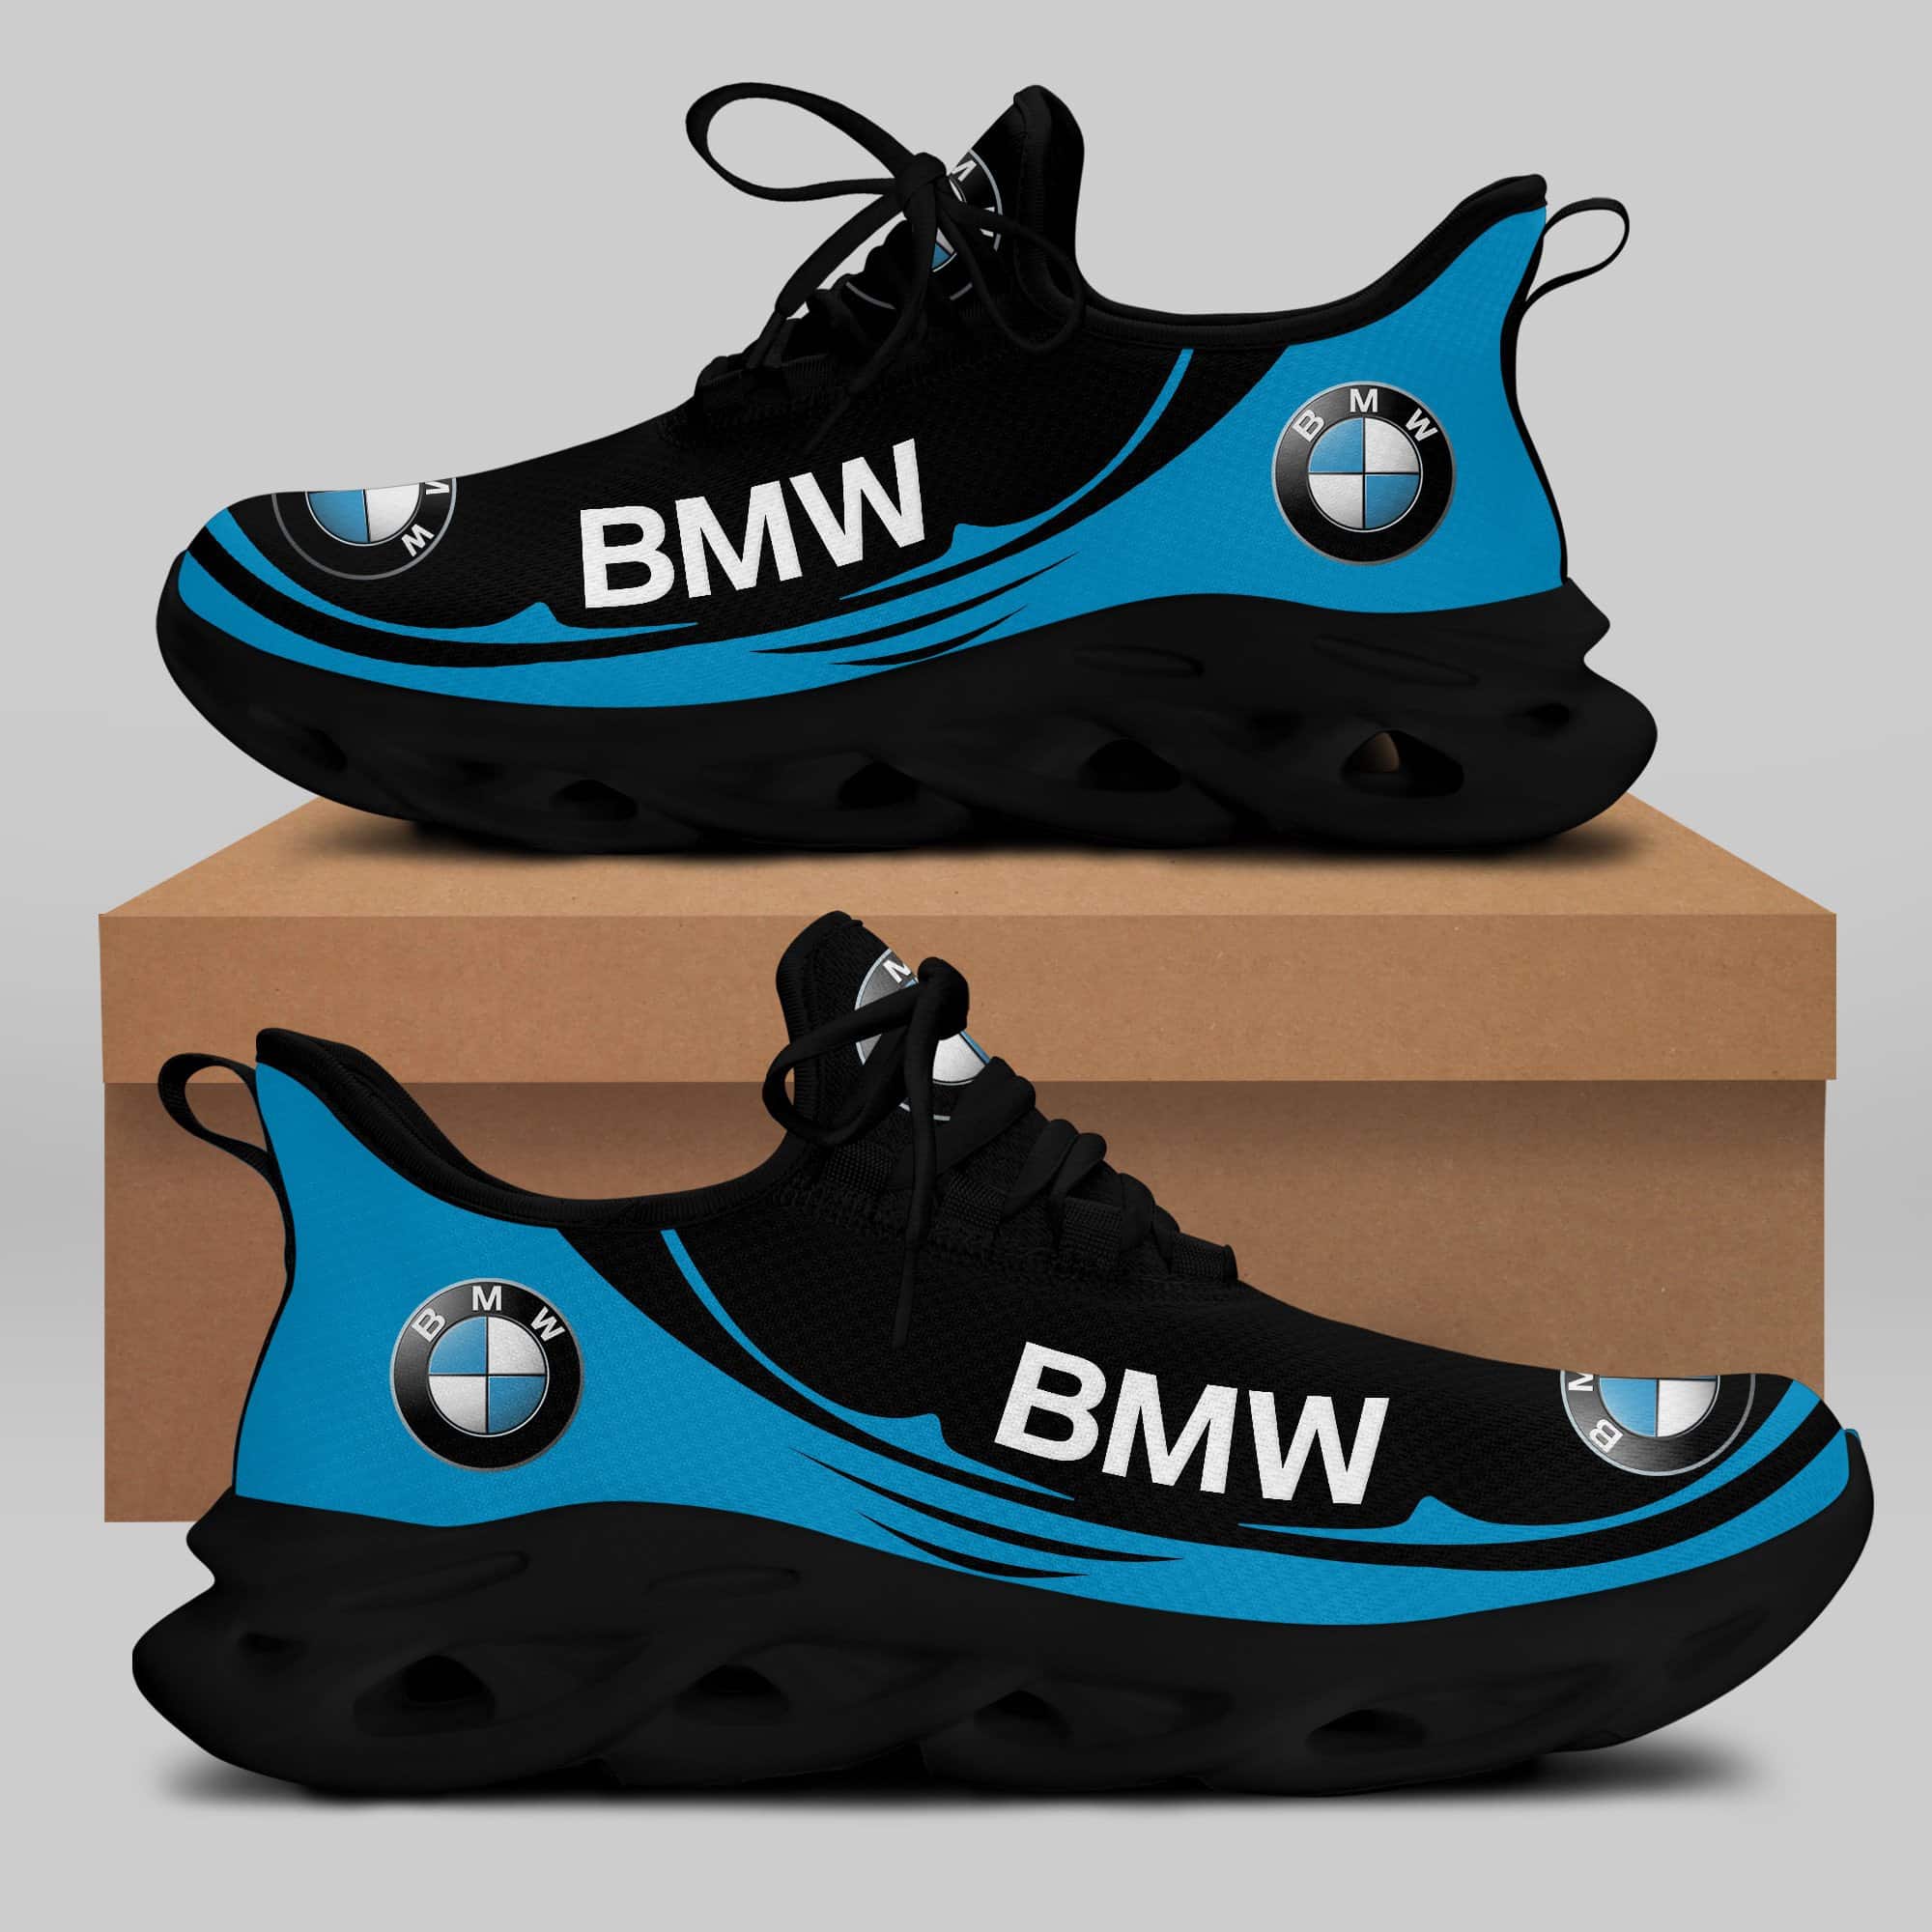 Bmw Running Shoes Max Soul Shoes Sneakers Ver 25 1